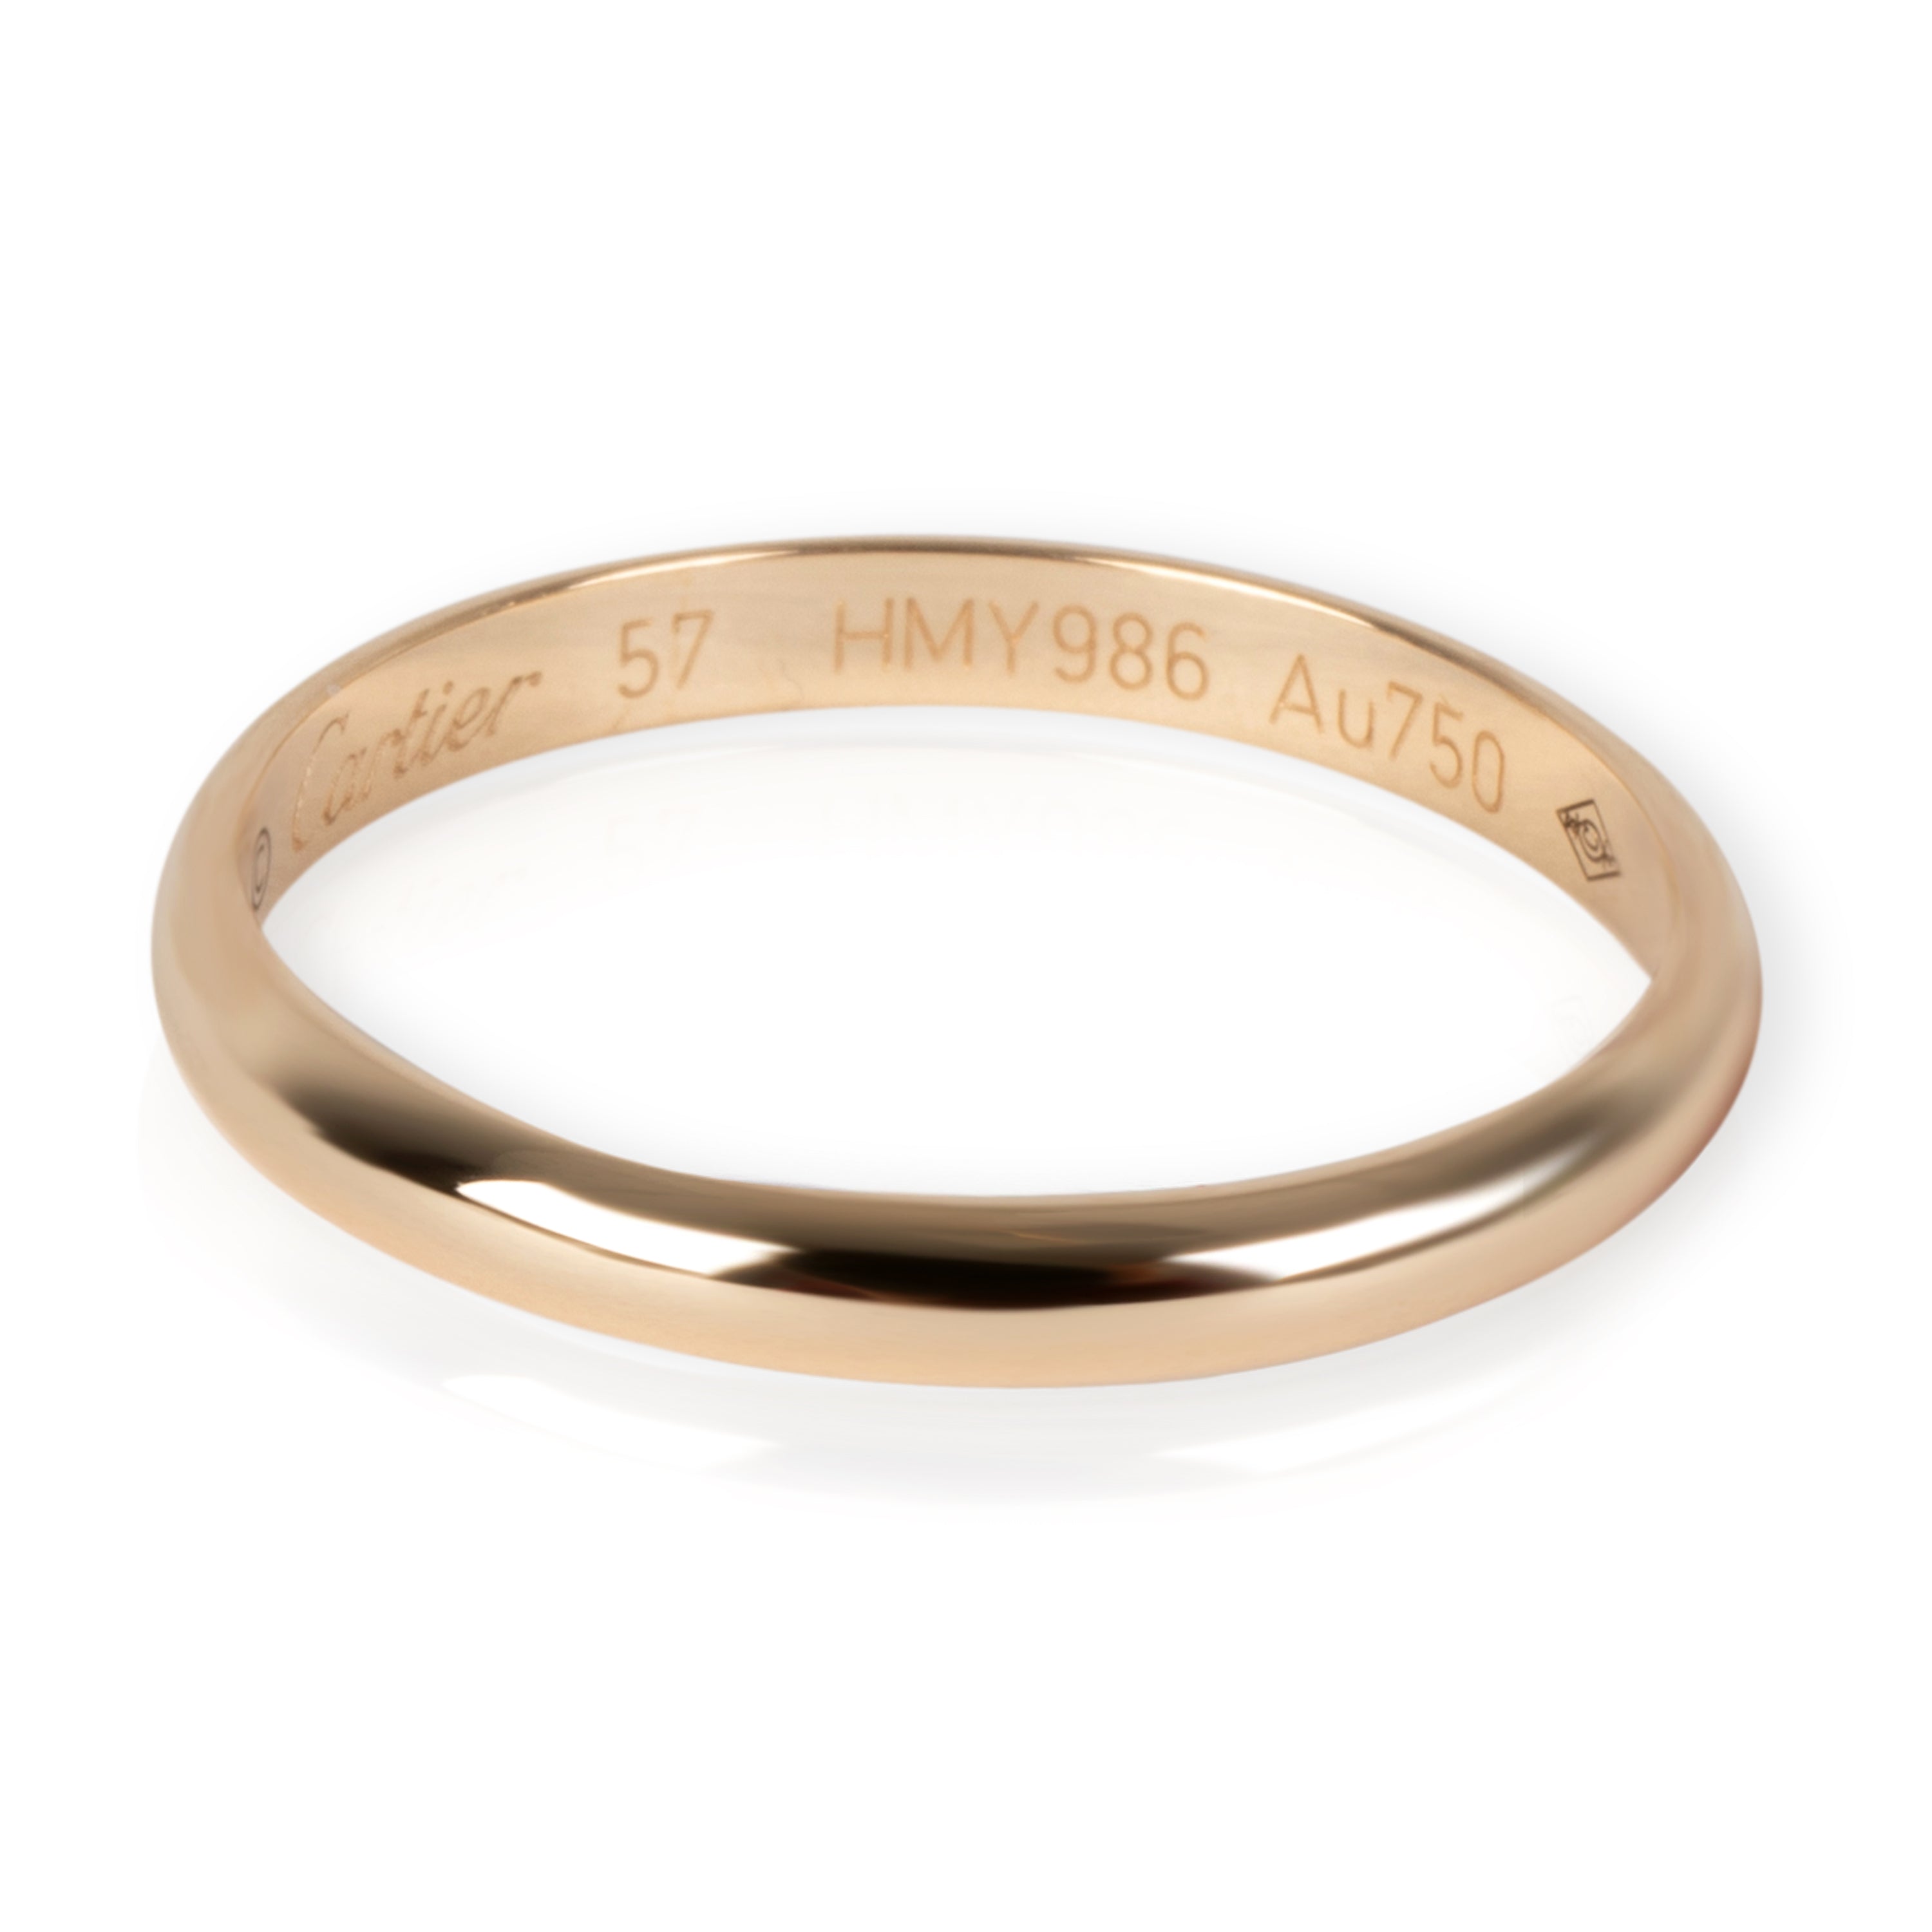 Cartier 1895 Wedding Band in 18K Yellow Gold by WP Diamonds